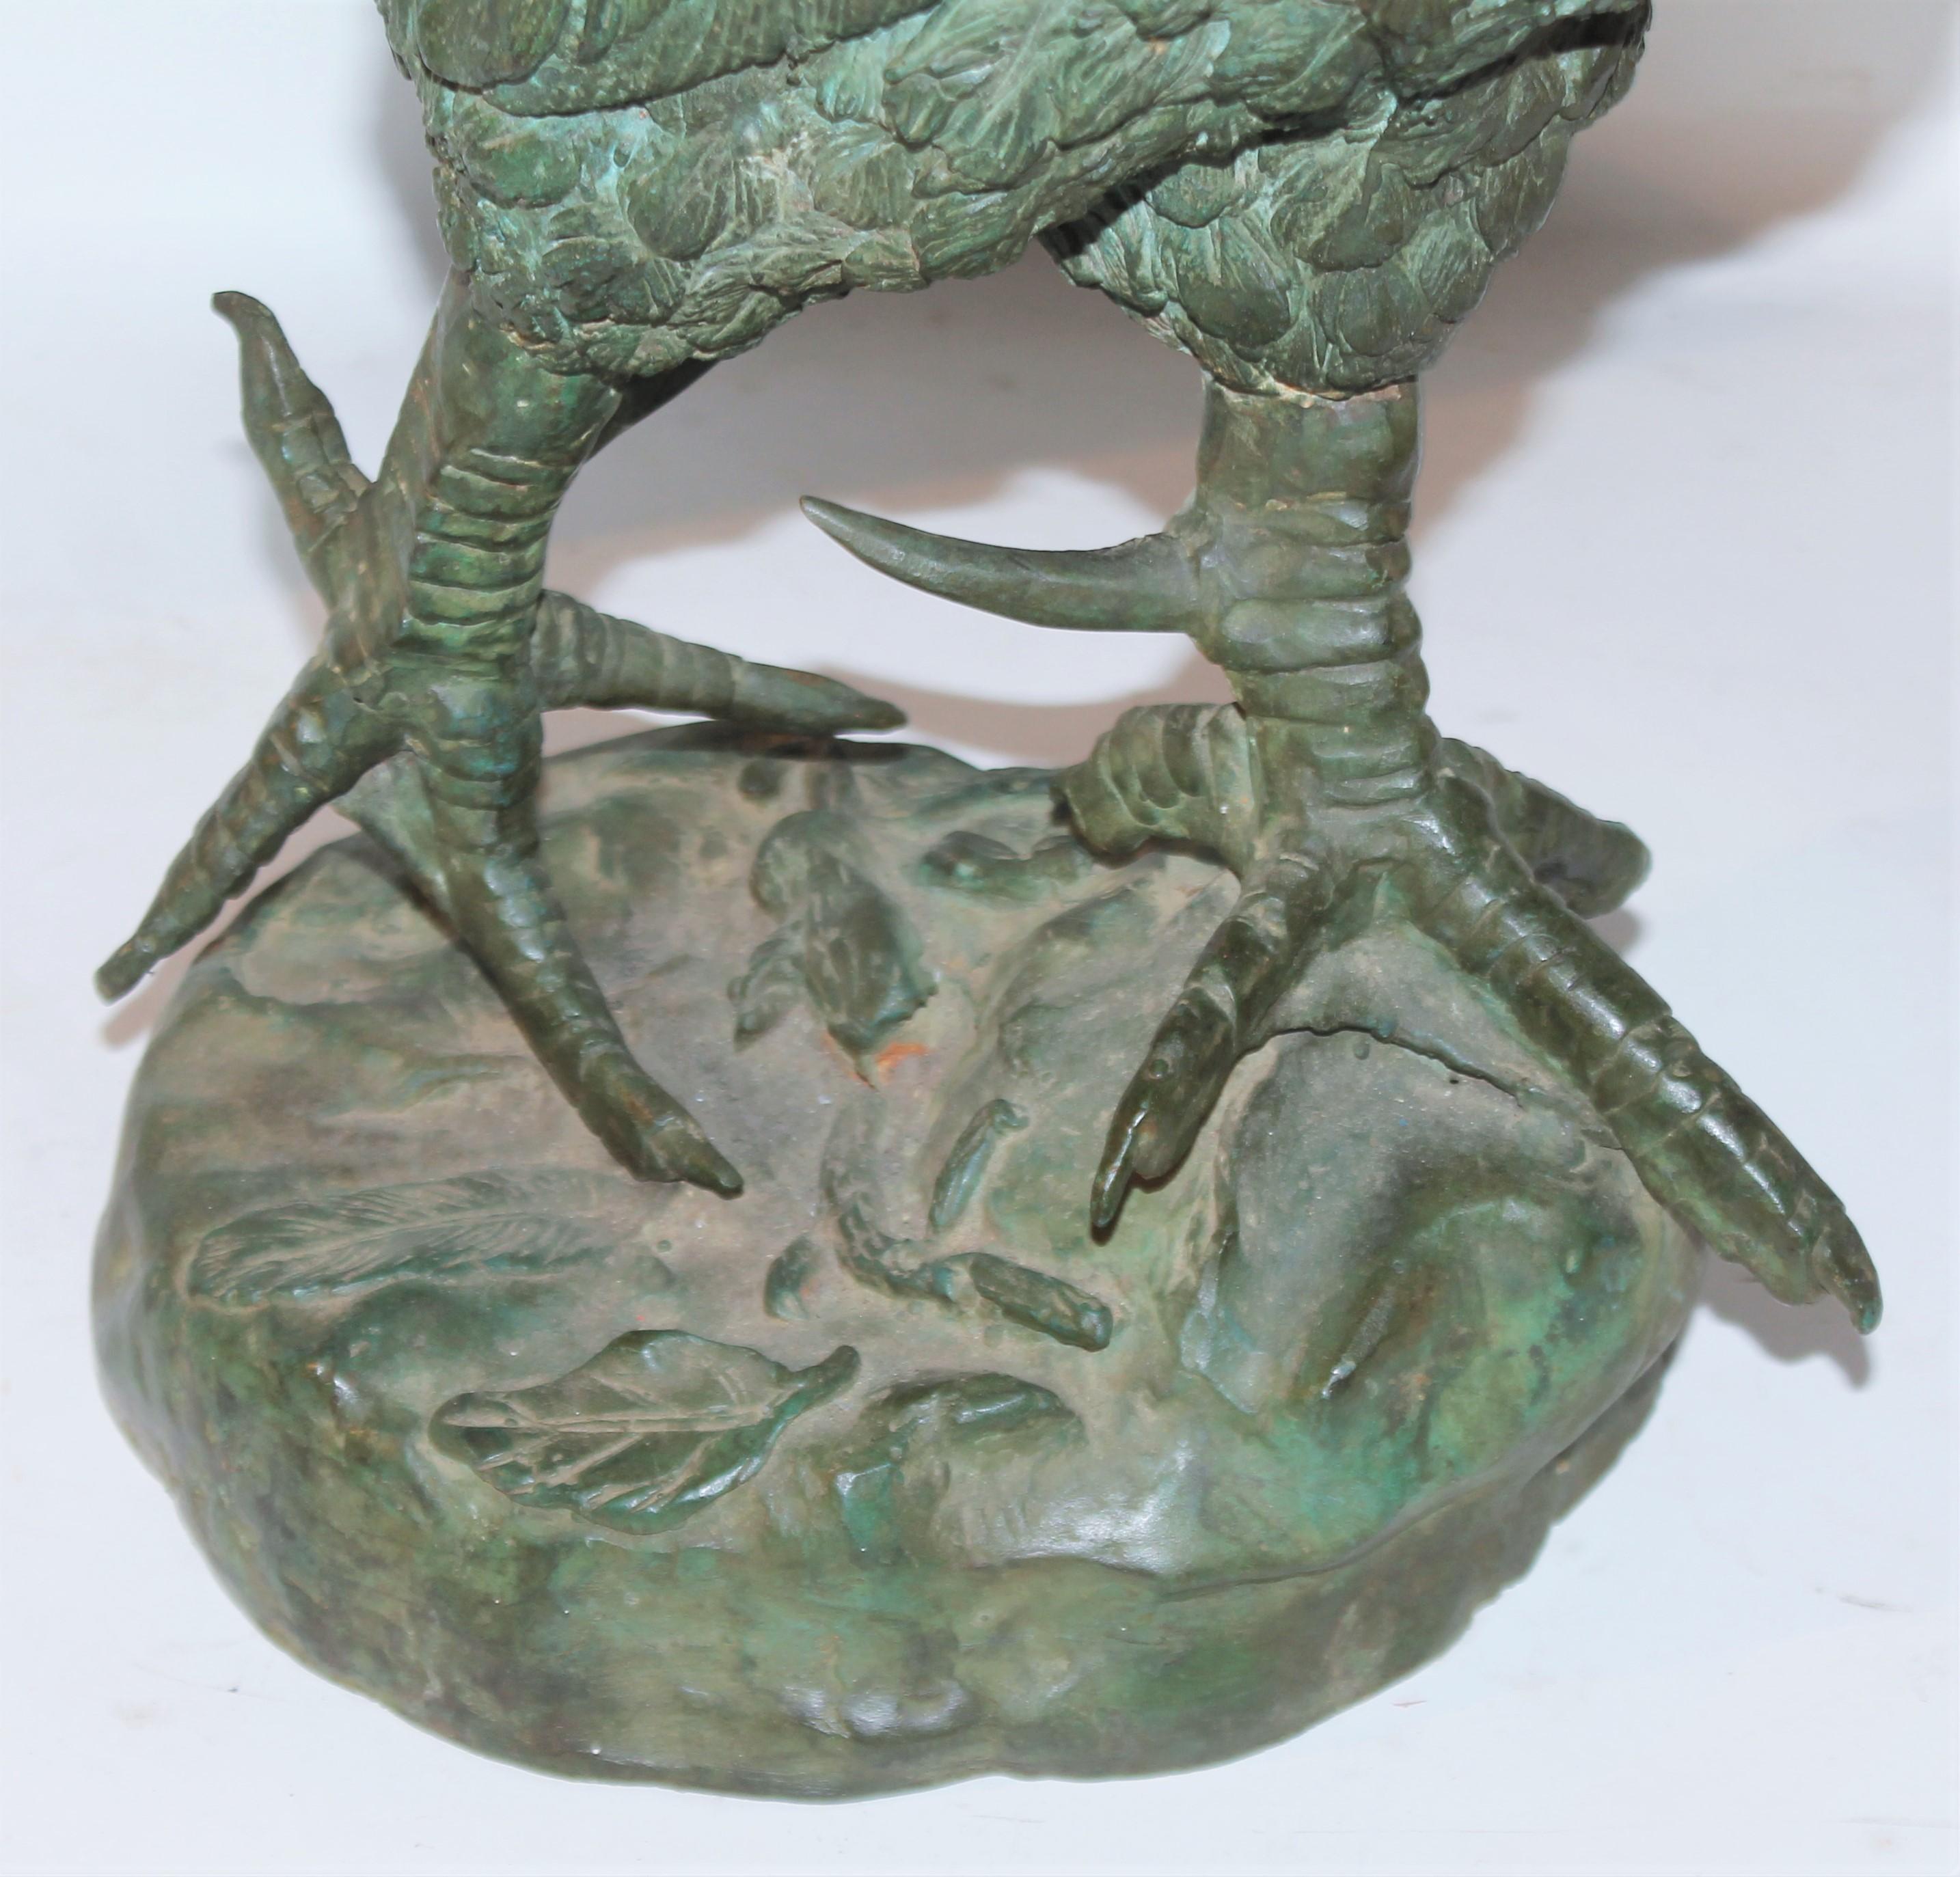 Early 20thc large rooster bronze sculpture in amazing undisturbed surface. This fine piece of art has a wonderful patina. Minor piece missing off a feather & does not detract from the sculpture.